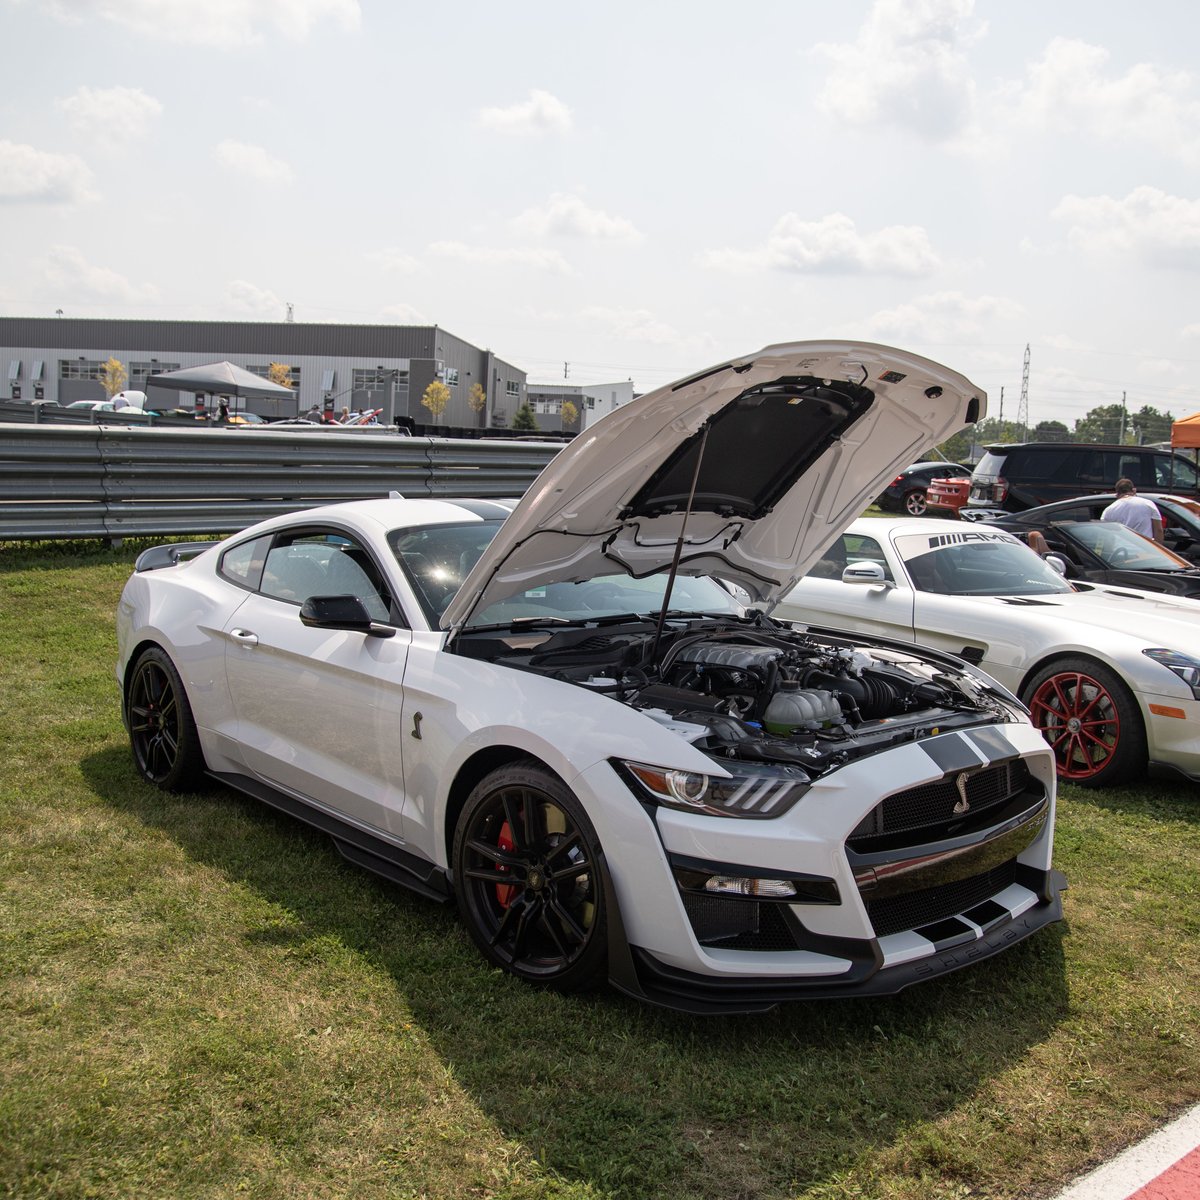 Do you have a show car that draws applause everywhere it goes? Apply to have your pride and joy displayed in the M1 Concourse Arena at Woodward Dream Show!

Submit your car here: fal.cn/3kKEg